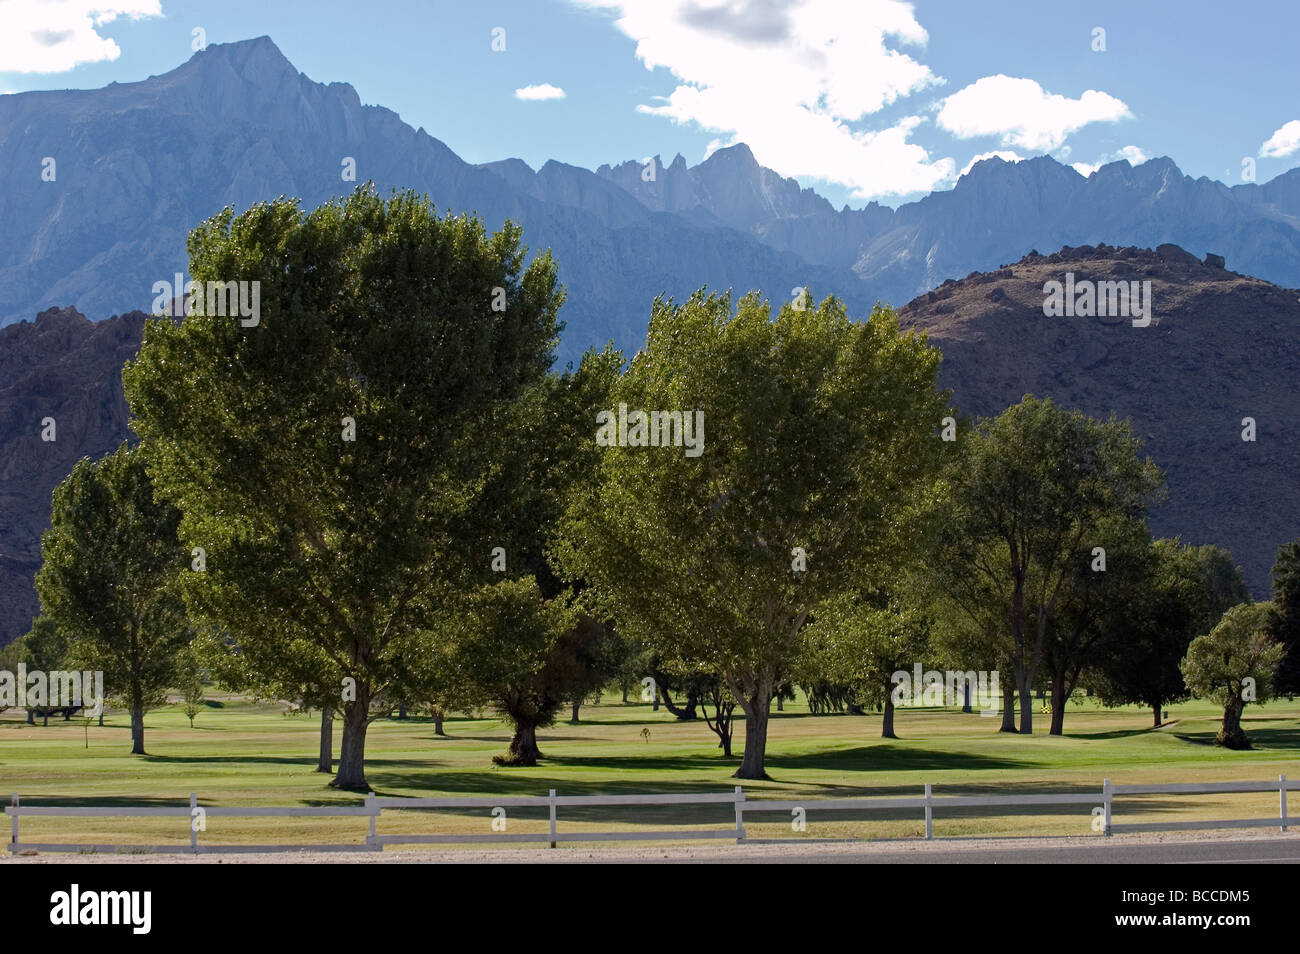 Mount Whitney Golf Club course and the Eastern Sierra mountains. Stock Photo